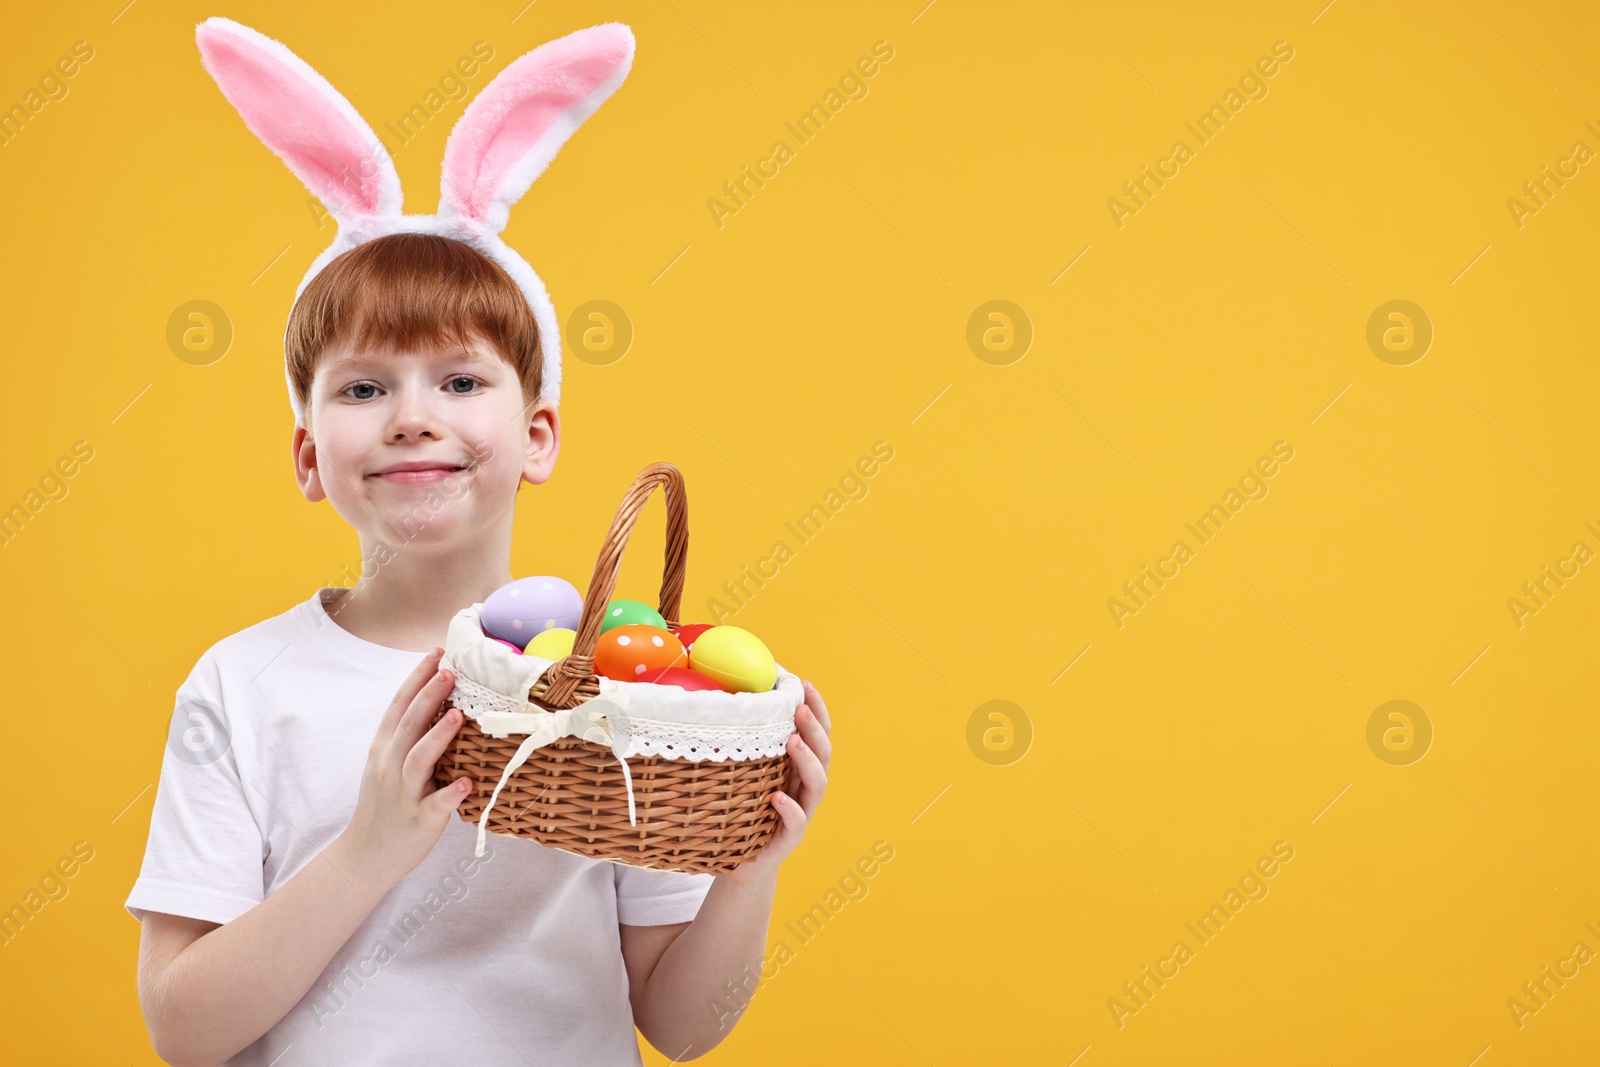 Photo of Easter celebration. Cute little boy with bunny ears and wicker basket full of painted eggs on orange background. Space for text